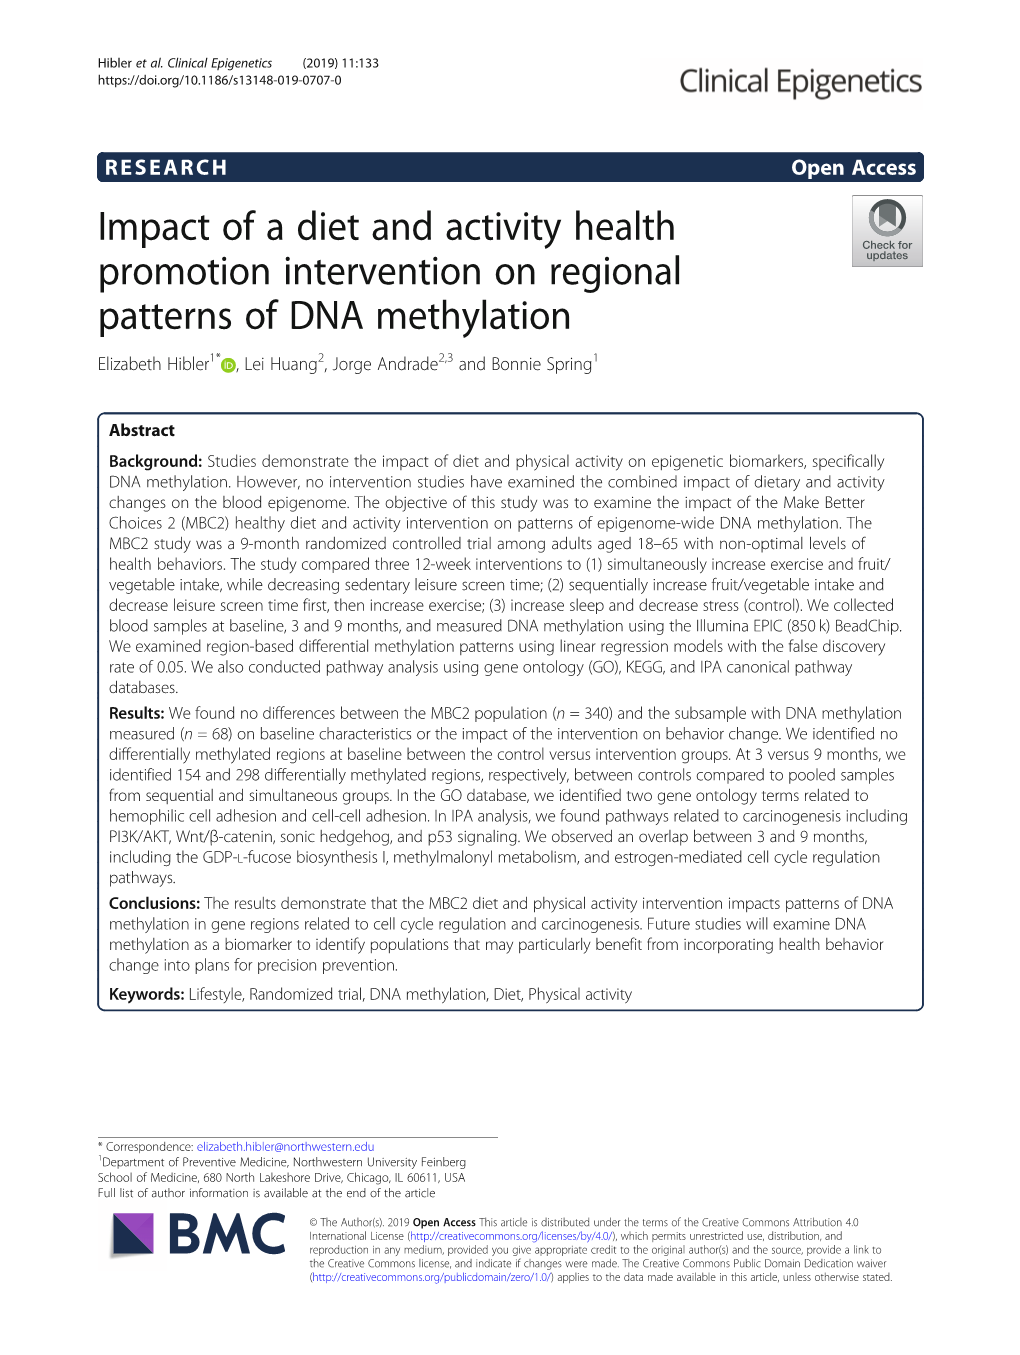 Impact of a Diet and Activity Health Promotion Intervention on Regional